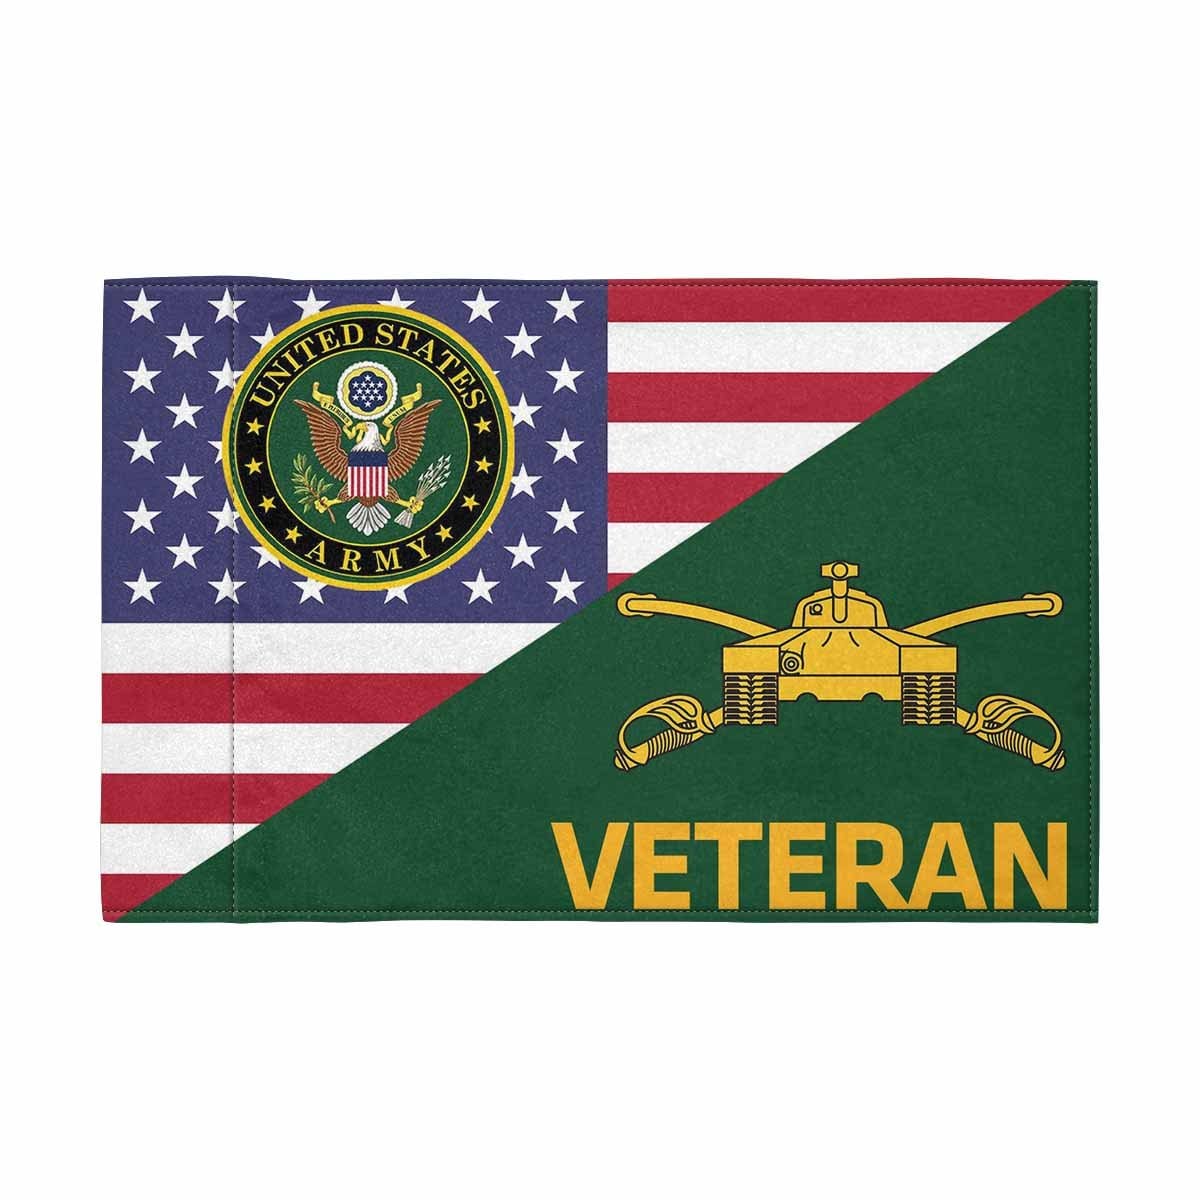 US Army Armor Veteran Motorcycle Flag 9" x 6" Twin-Side Printing D01-MotorcycleFlag-Army-Veterans Nation